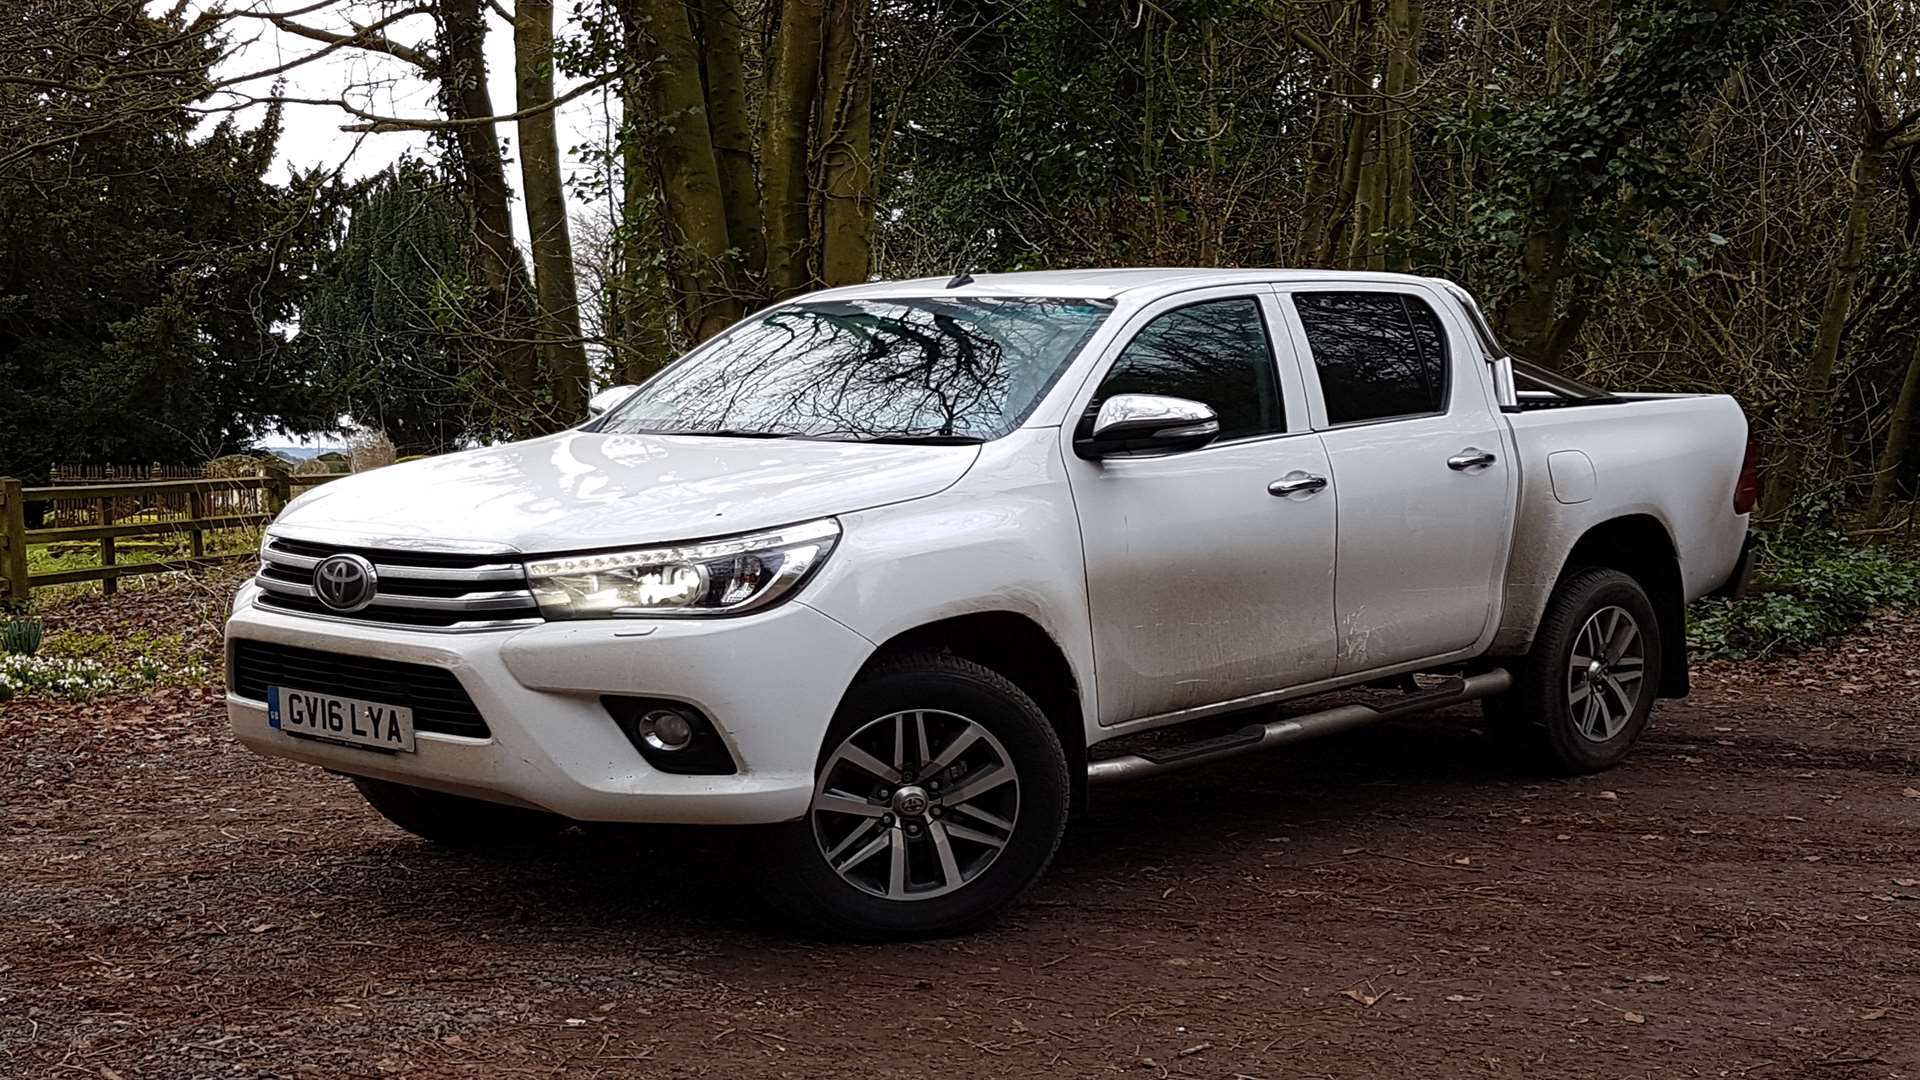 The Hilux is built to last